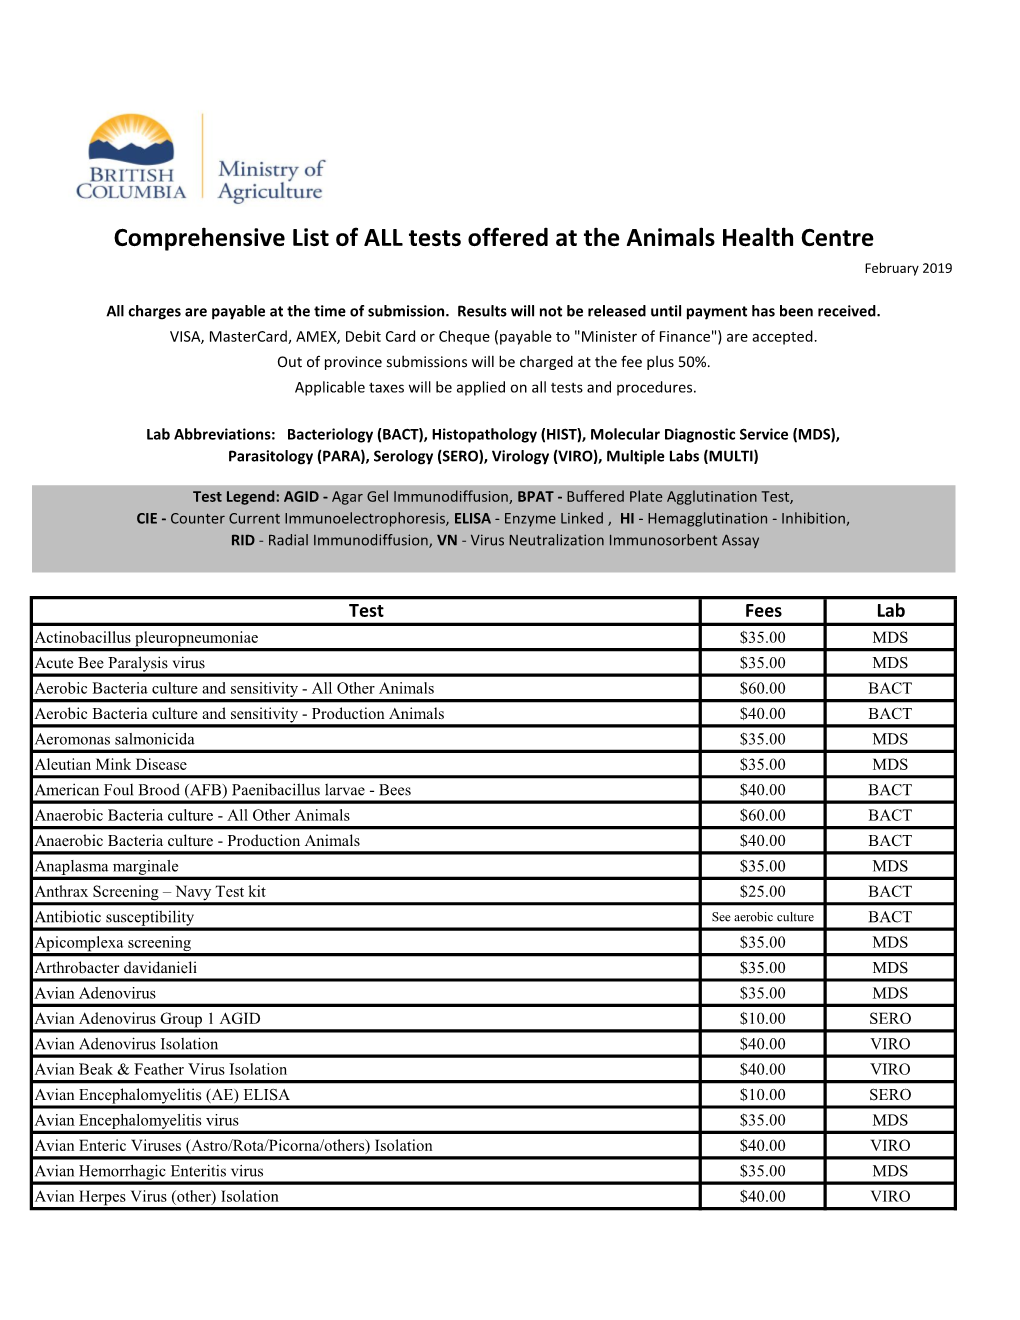 Comprehensive List of ALL Tests Offered at the Animals Health Centre February 2019